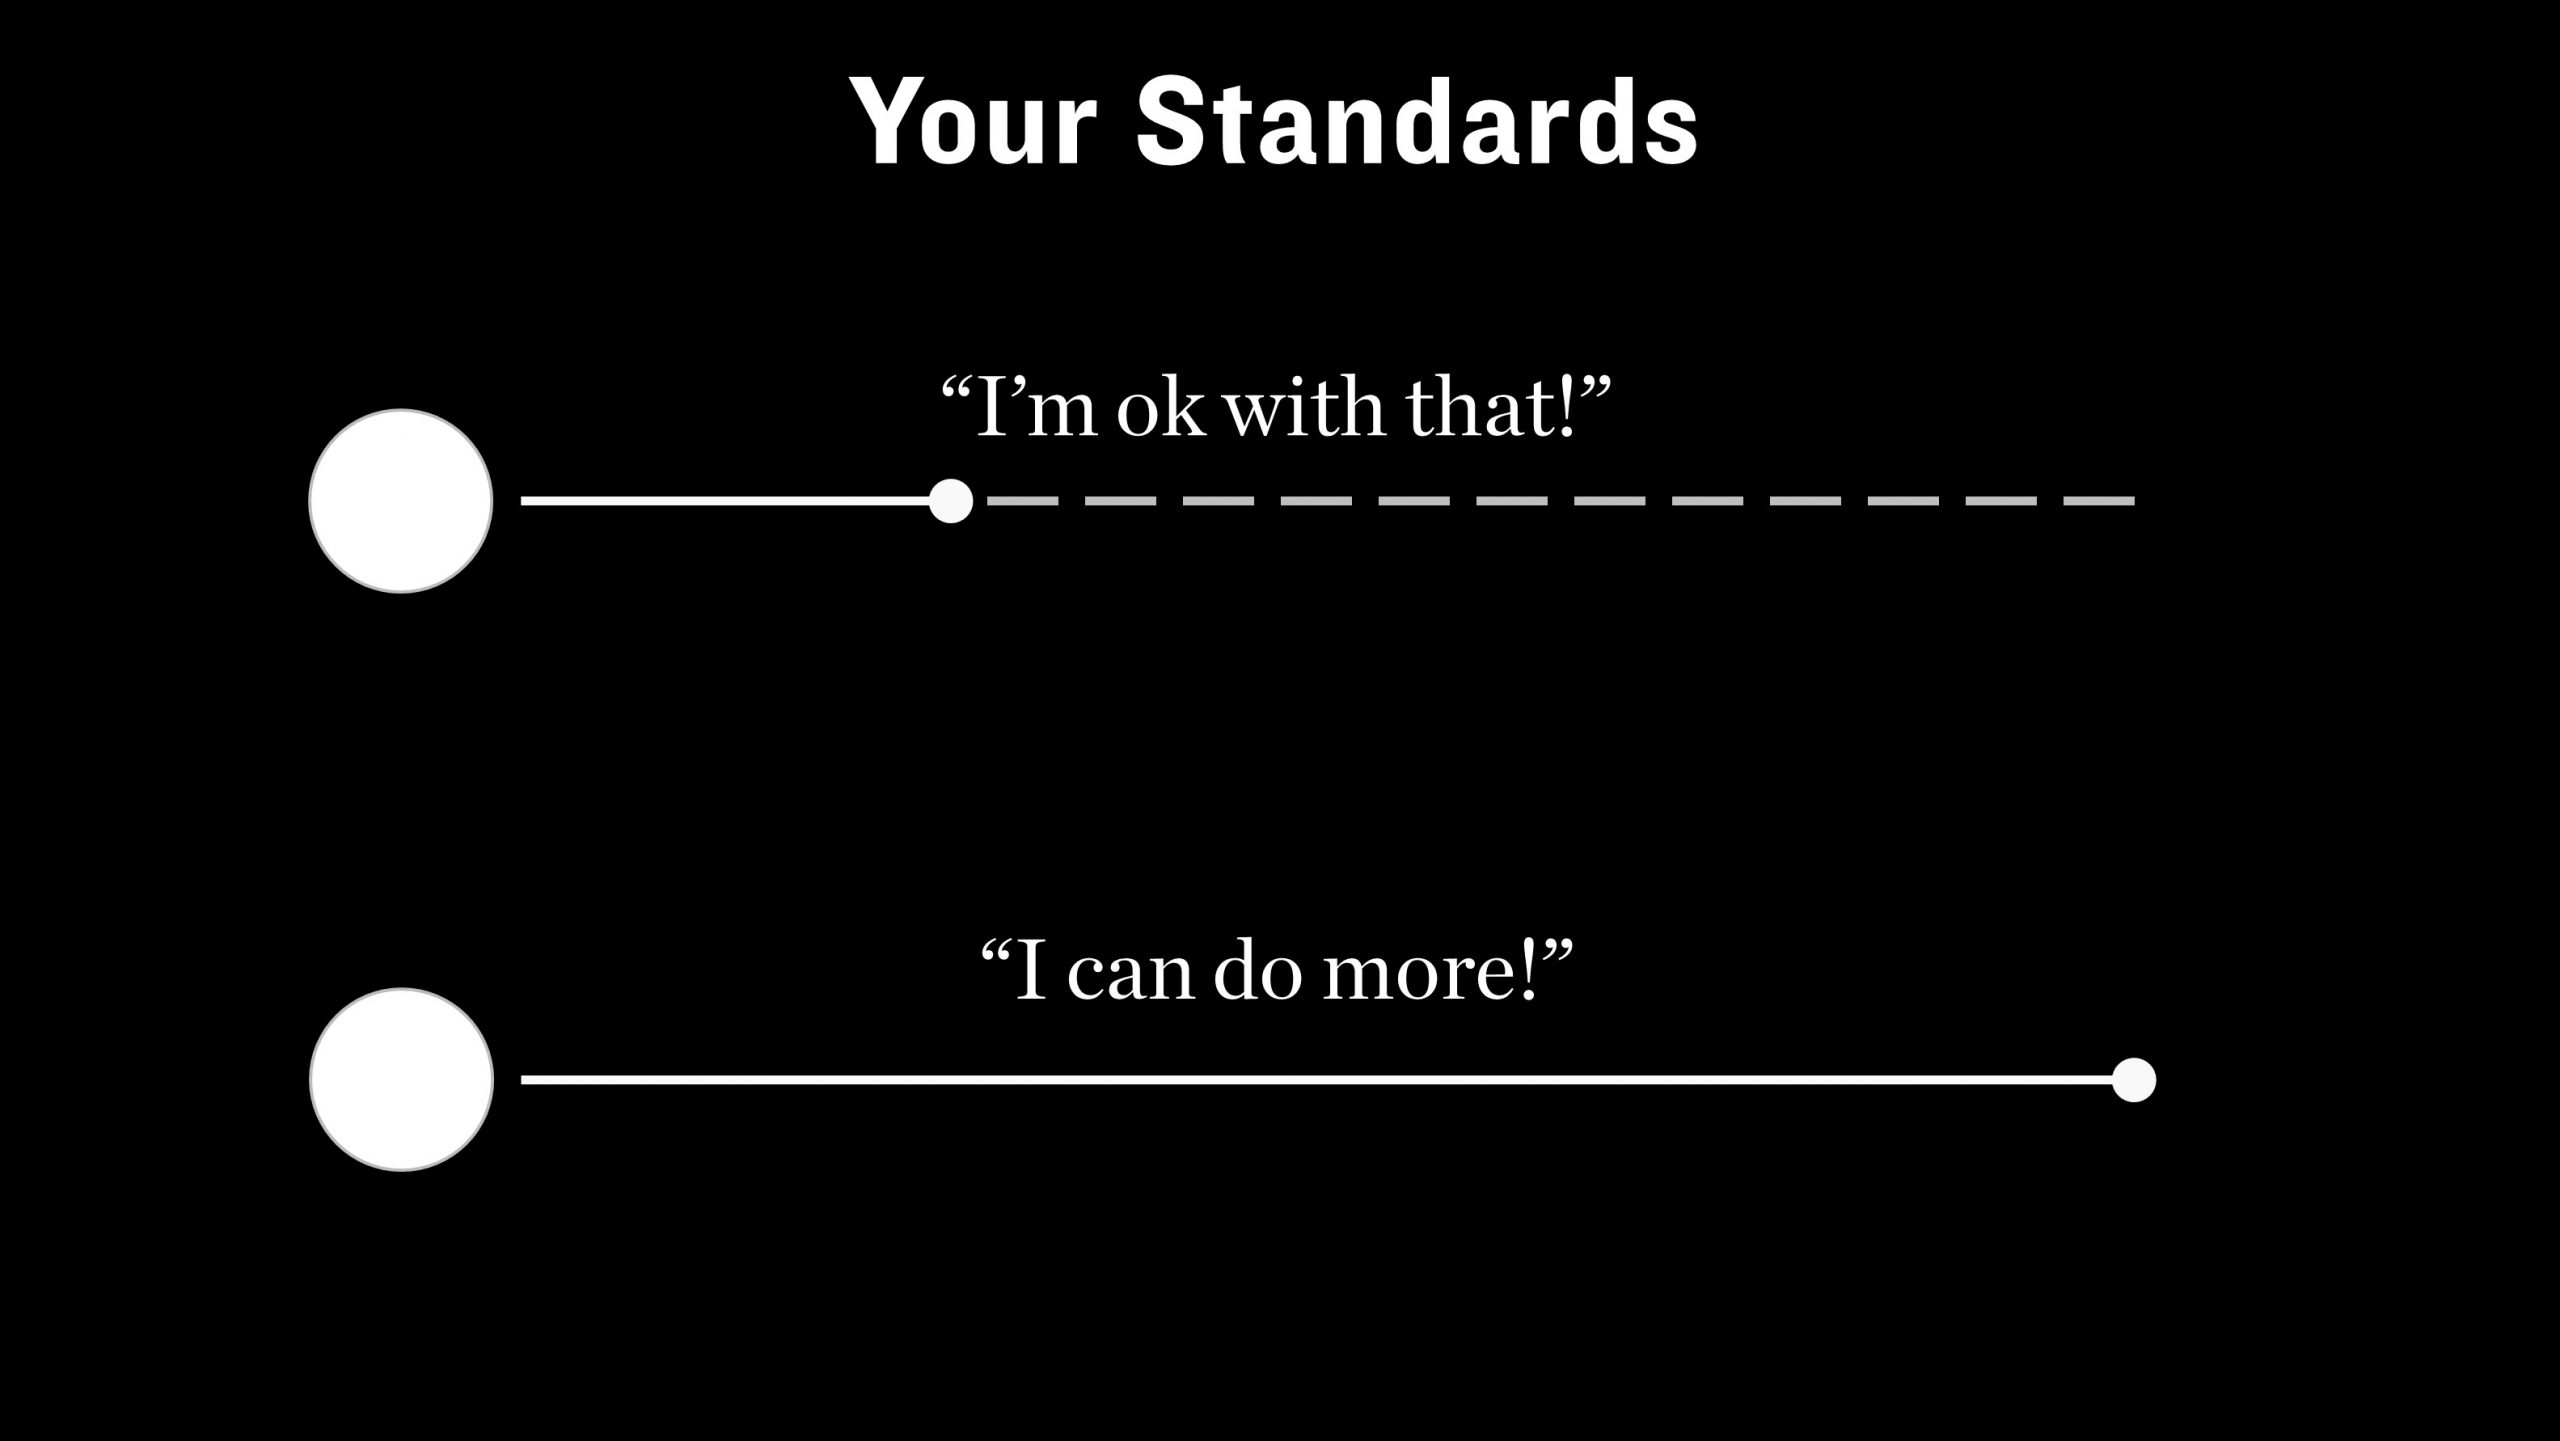 Your lowest standards